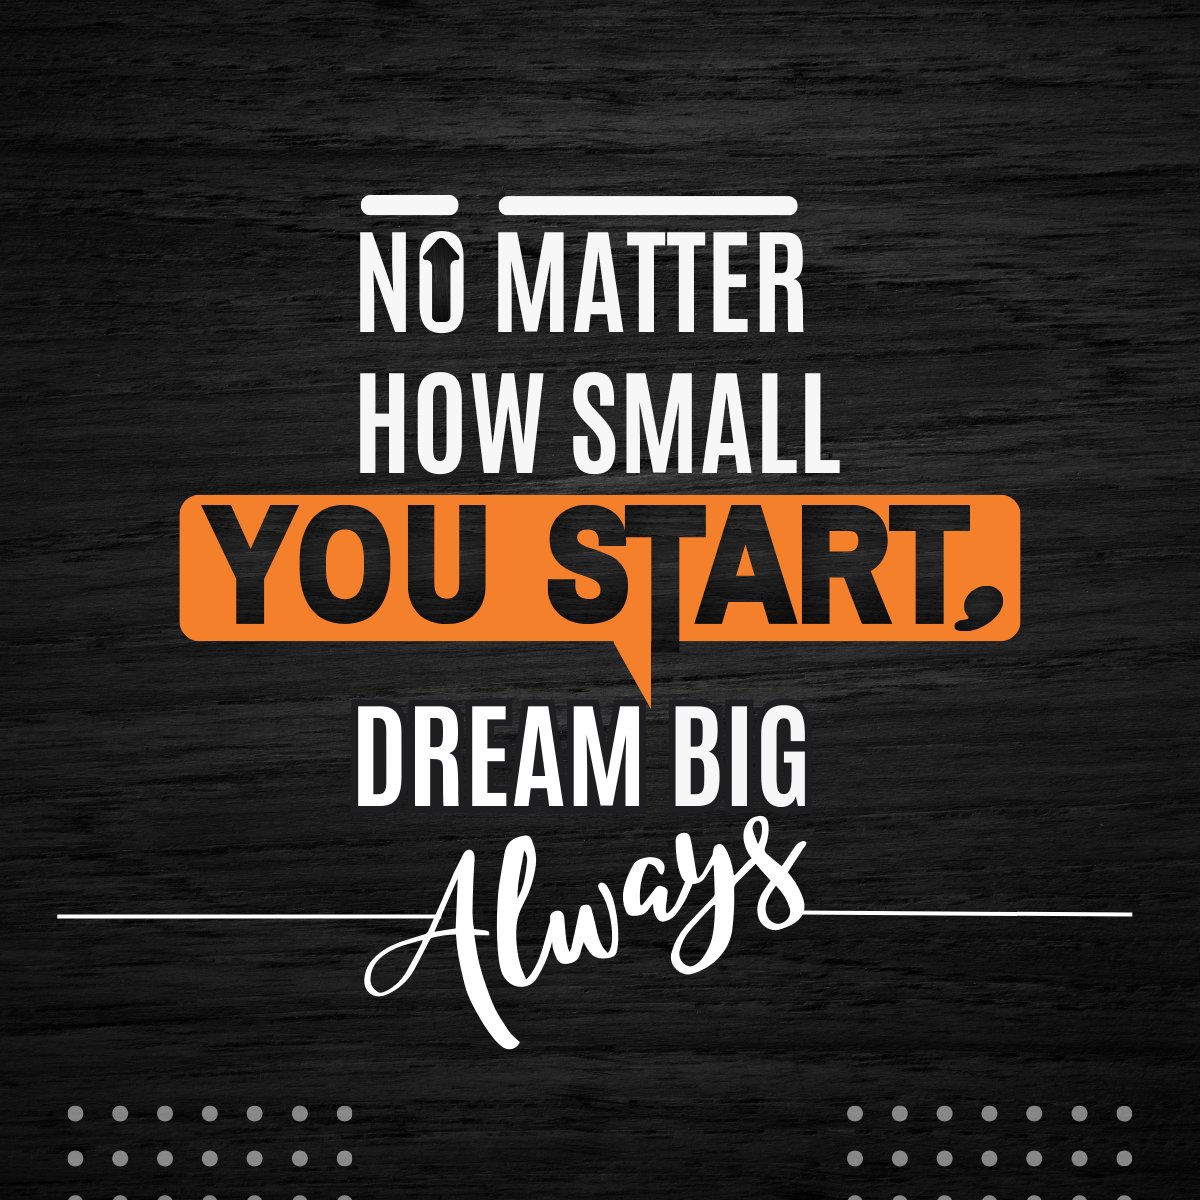 From humble beginnings to soaring dreams! 🚀✨ No matter how small you start, always dream big. 💭 #DreamBig #SmallBeginnings #Ambition #Goals #Inspiration #CygniSoft